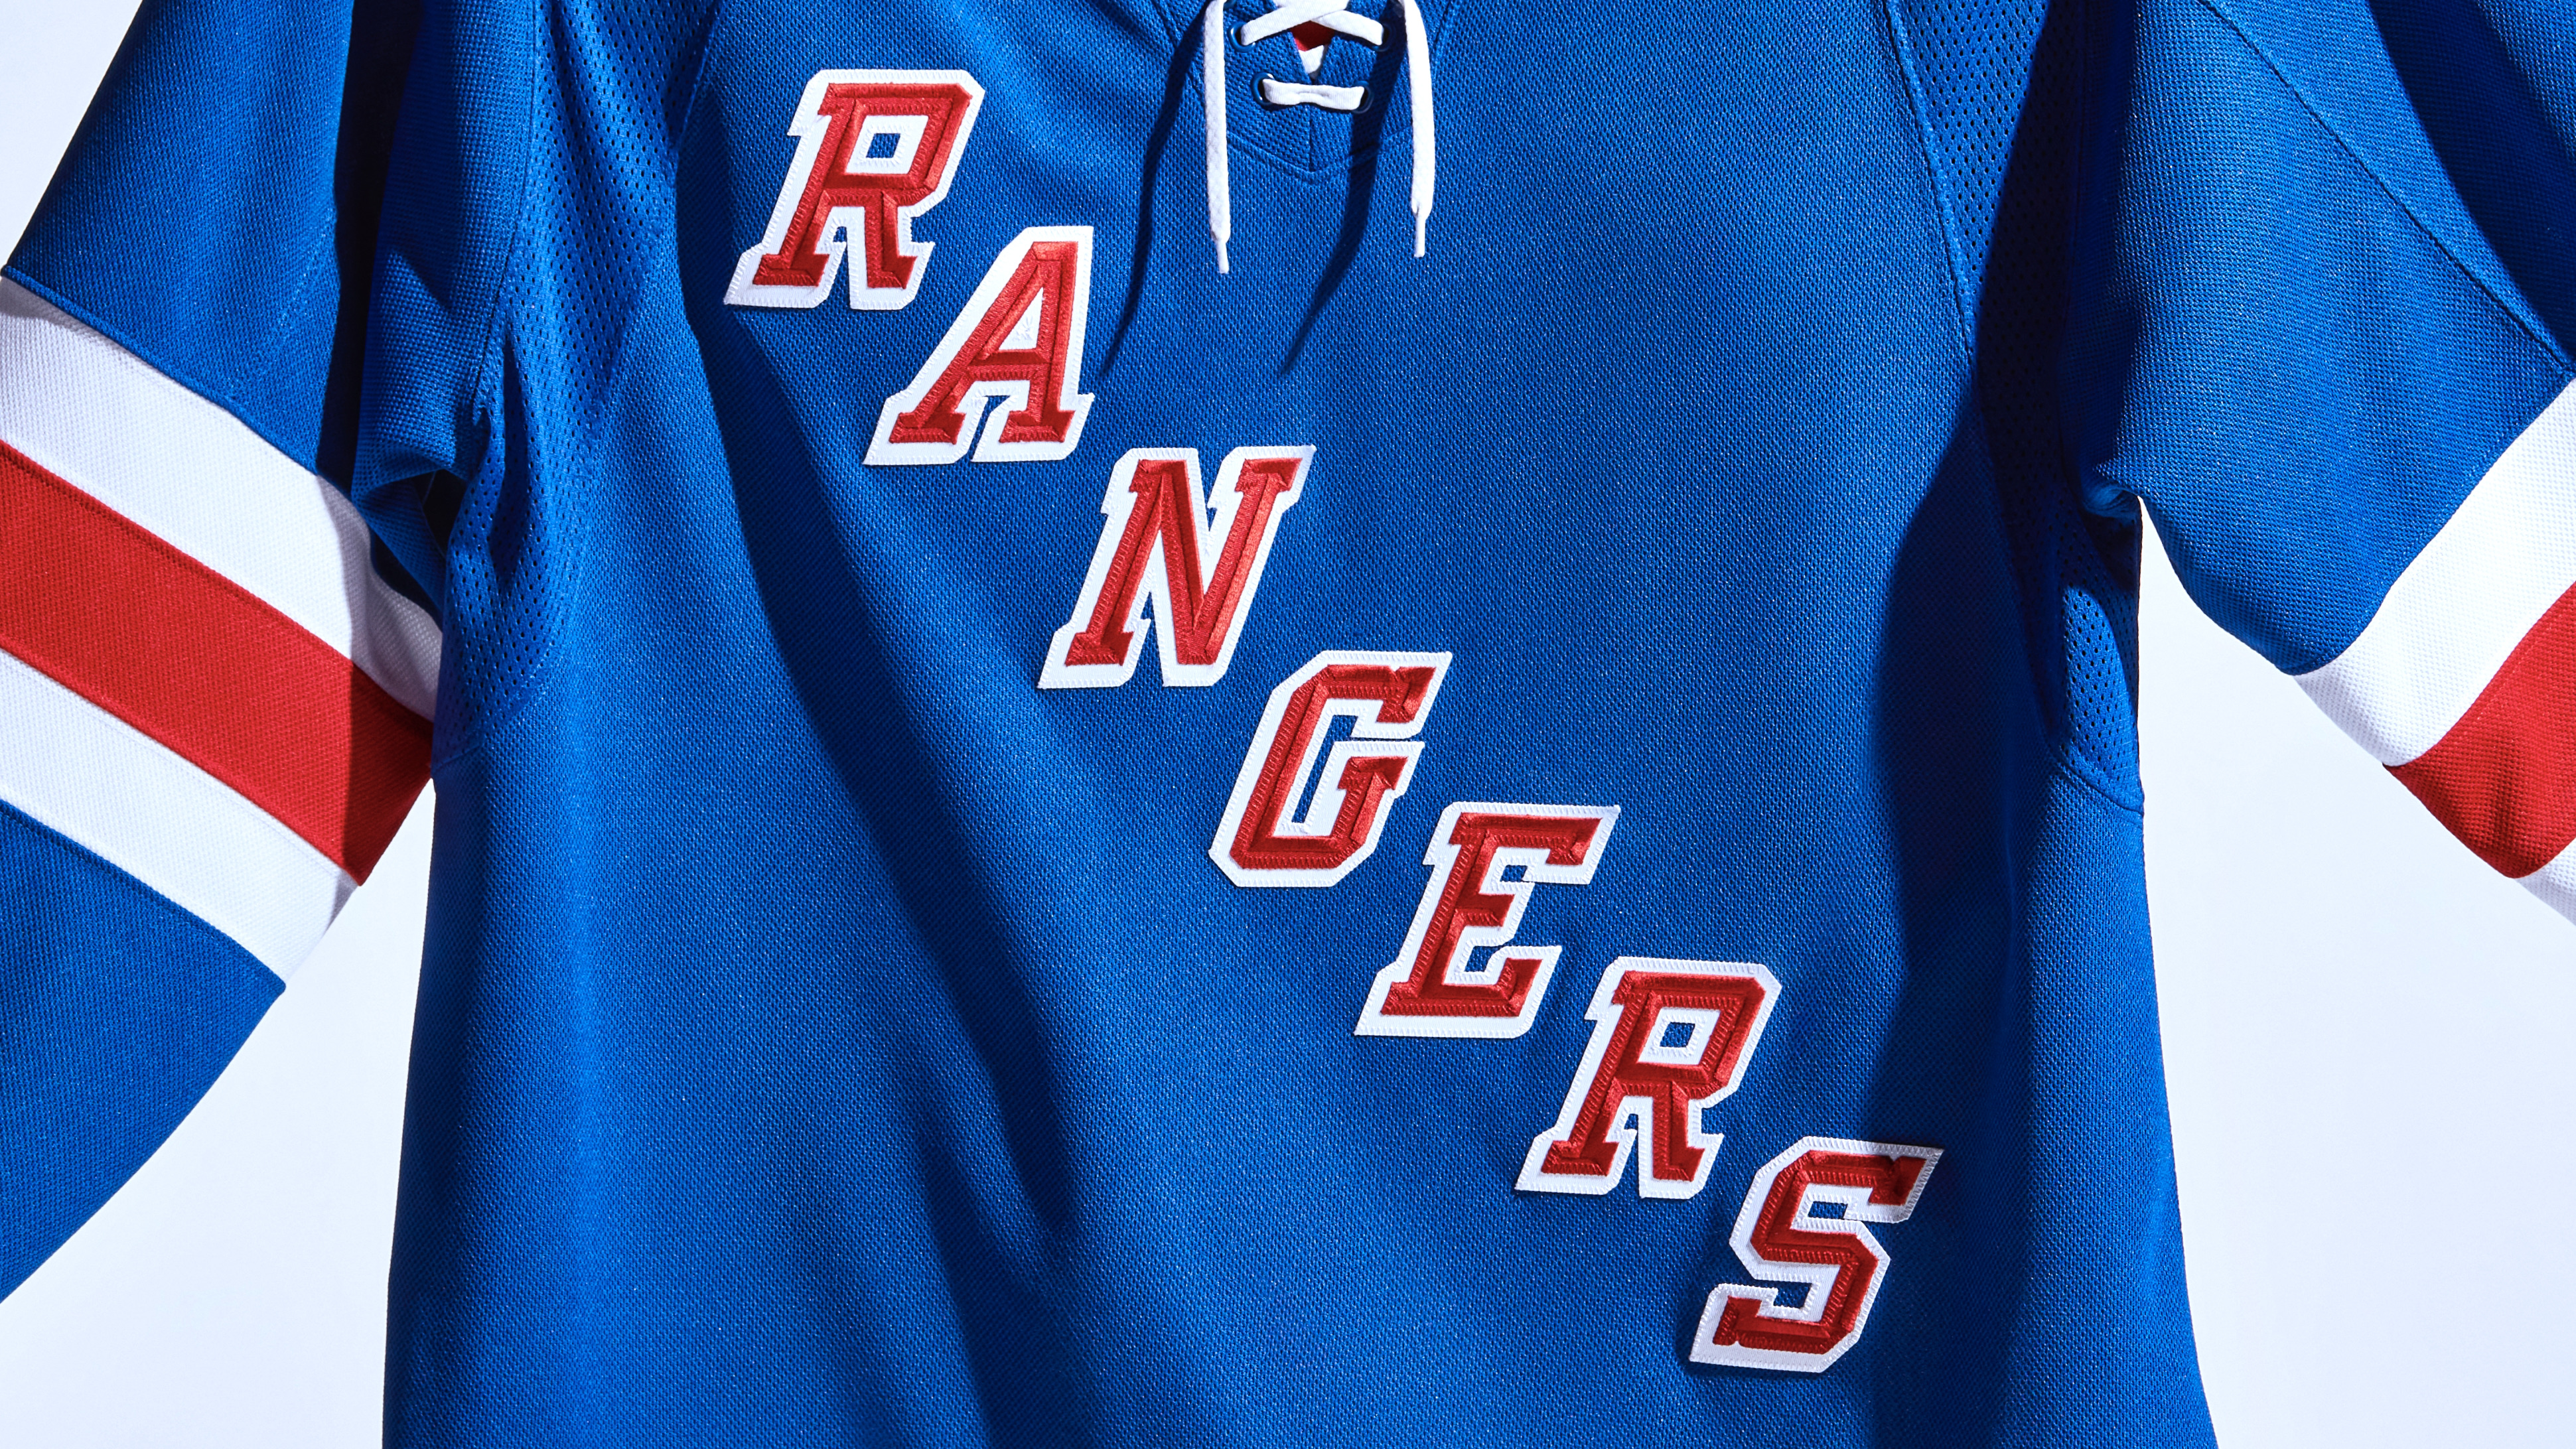 The New York Rangers home blue sweater for the 2021-22 season